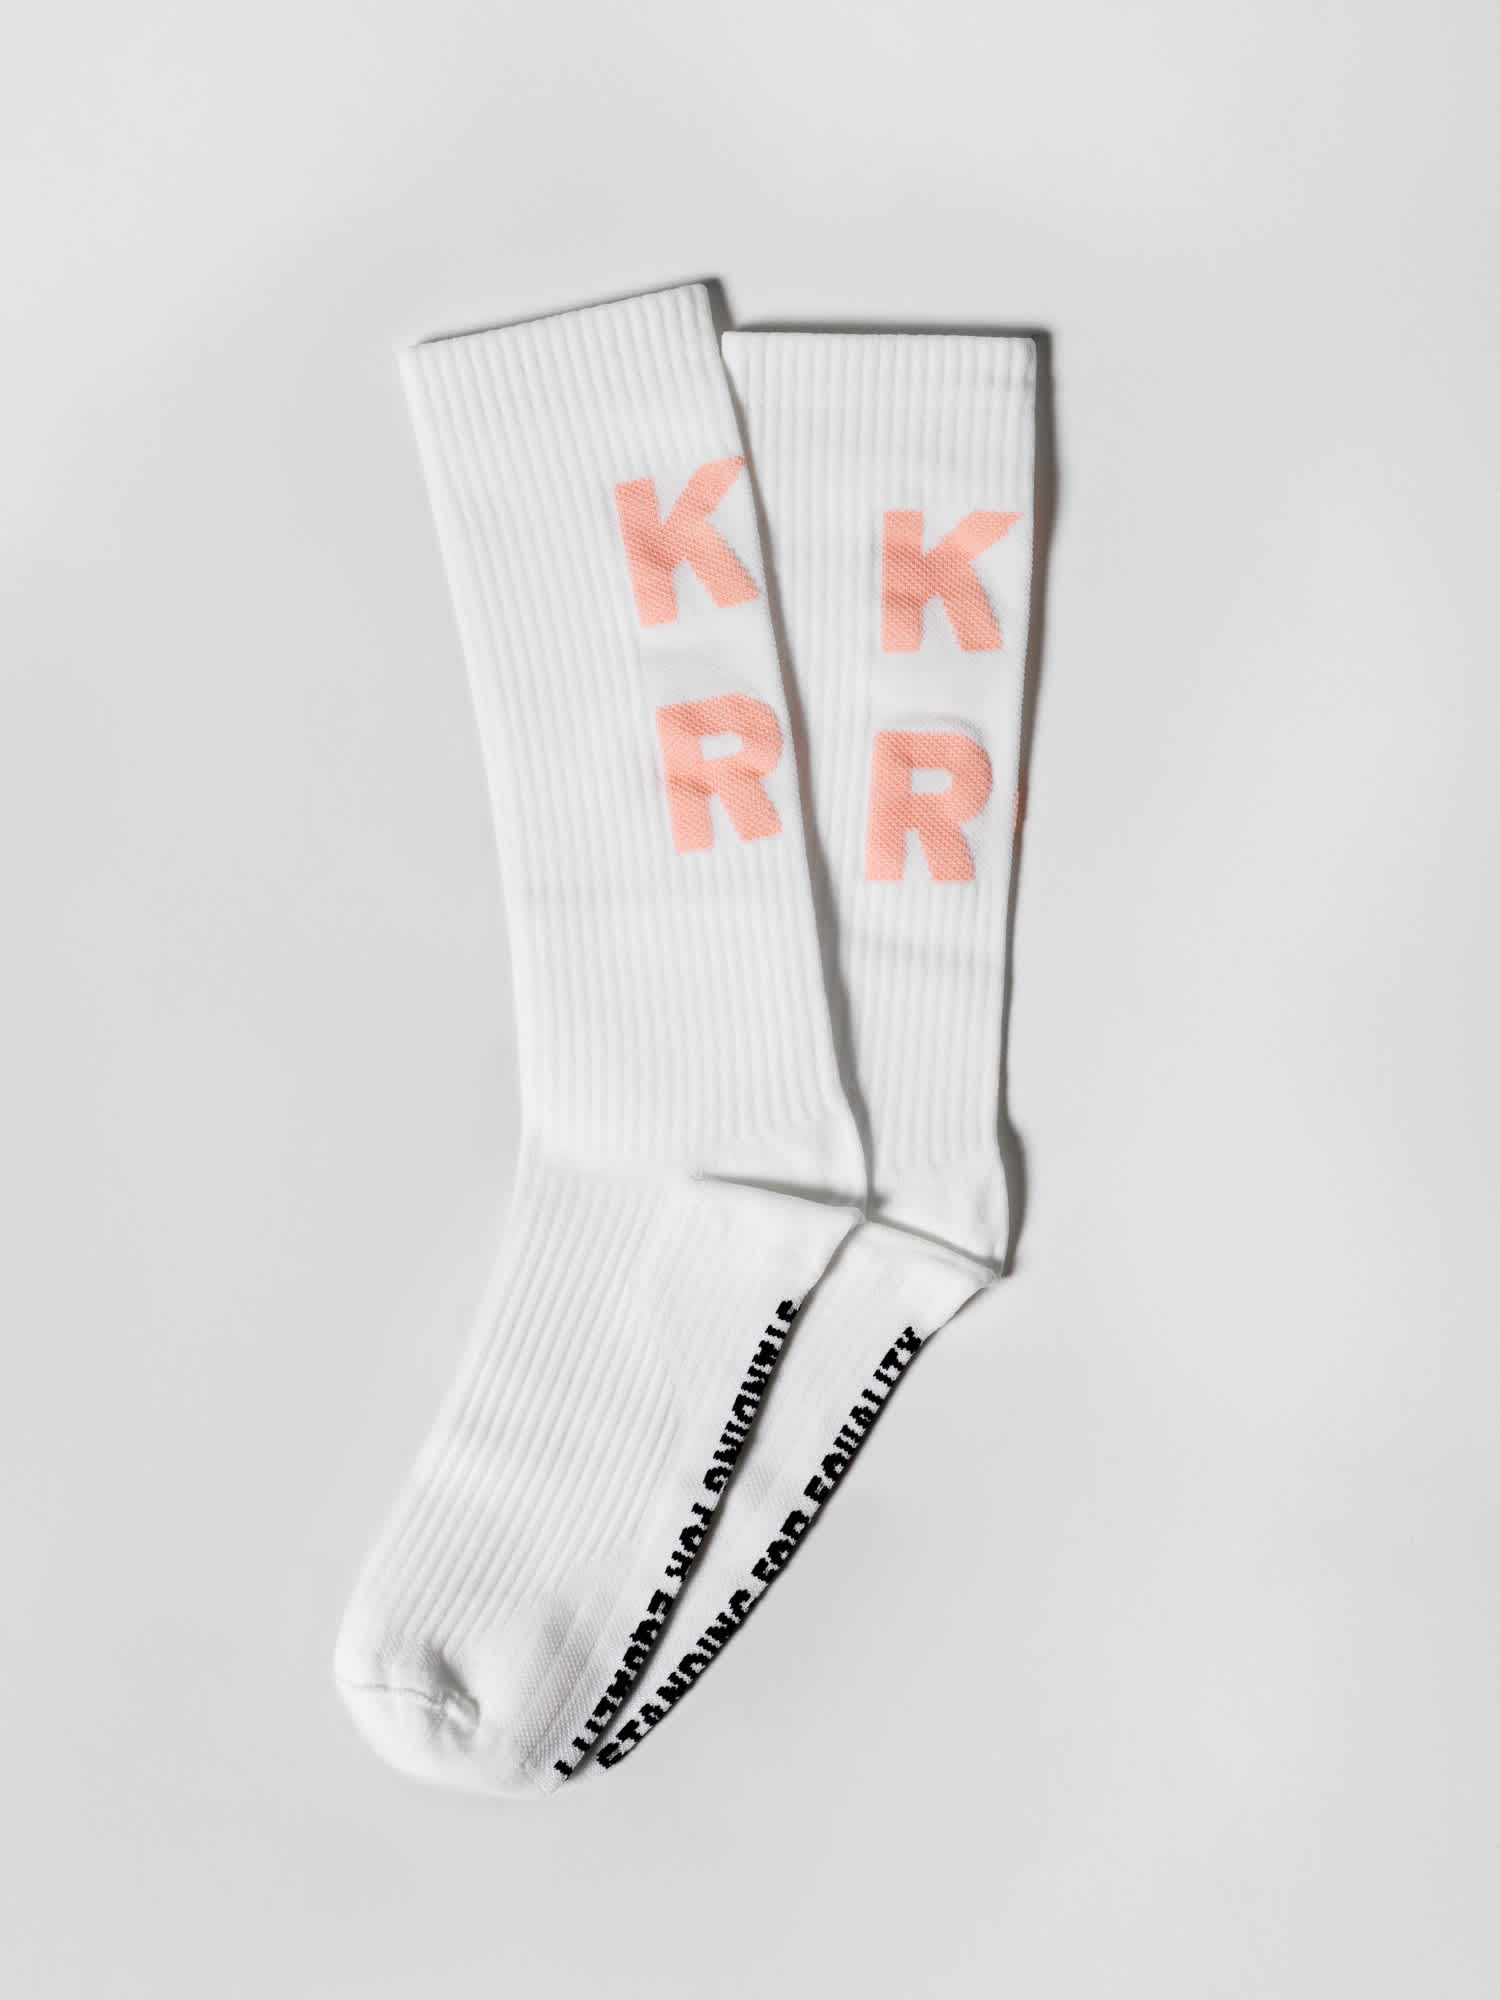 Product photo: white socks with pink Kyrö letters spelled out. 